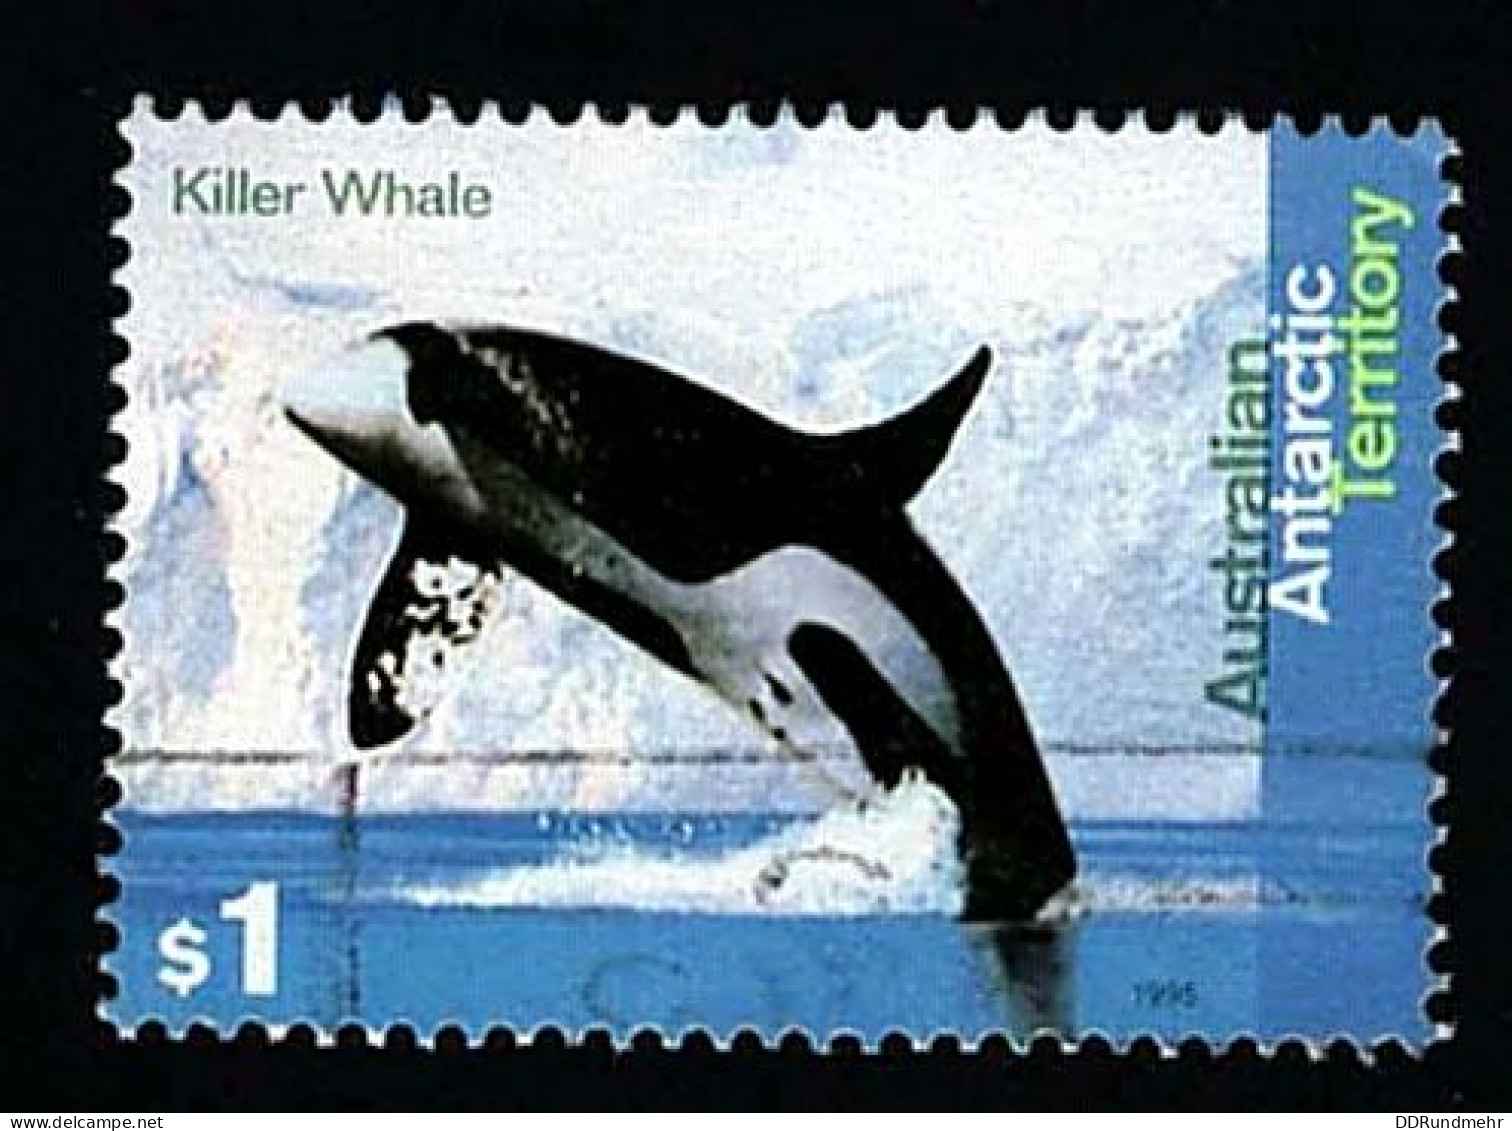 1995 Orca Michel AQ 105 Stamp Number AQ L97 Yvert Et Tellier AQ 105 Stanley Gibbons AQ 111 Unificato AU-TAA 105 Used - Used Stamps